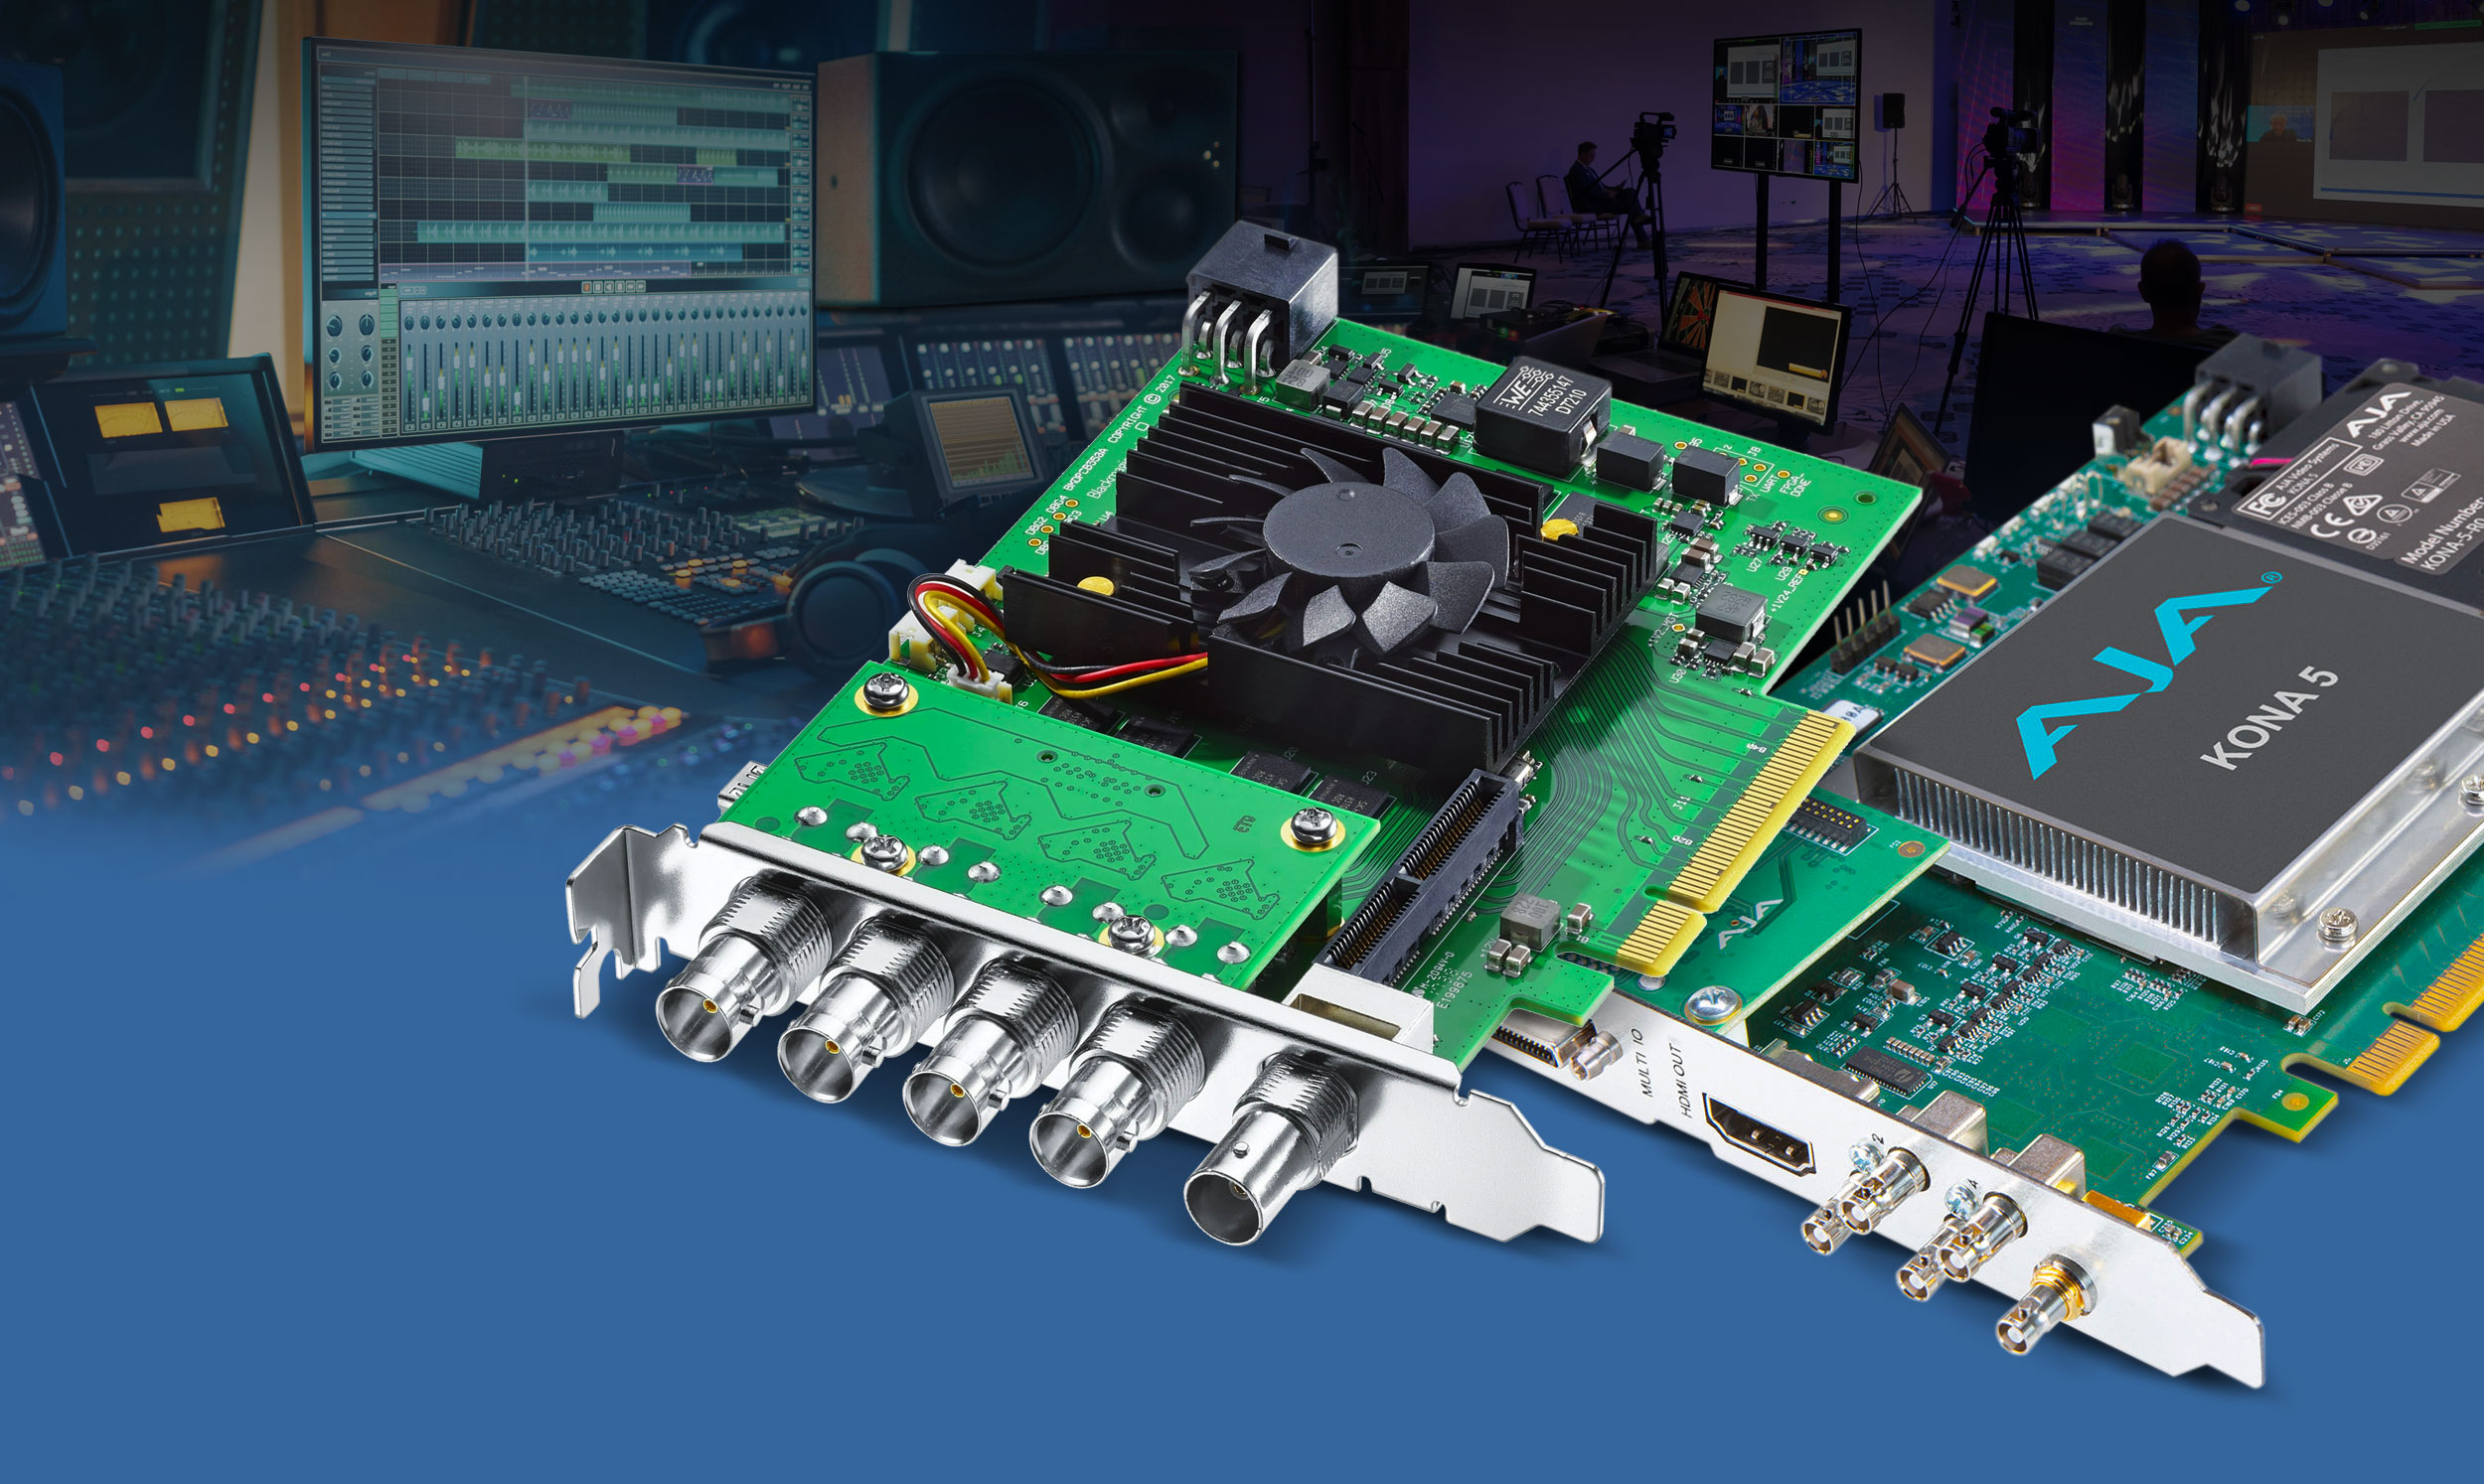 Two High-bandwidth PCIe Cards with Broadcast Studio In Background